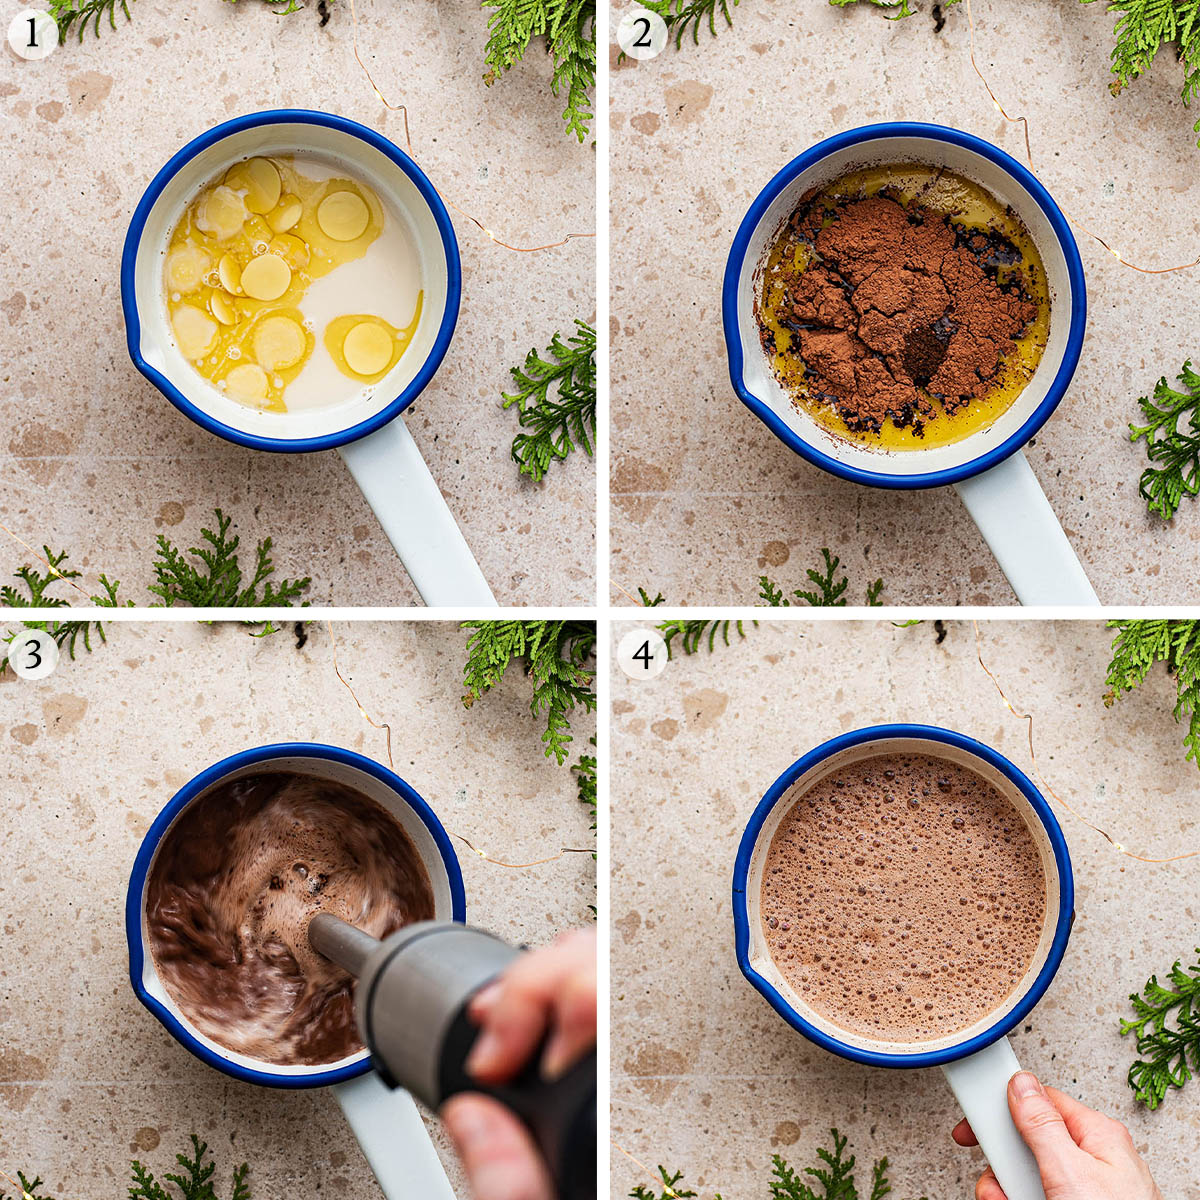 Hot chocolate steps 1 to 4.